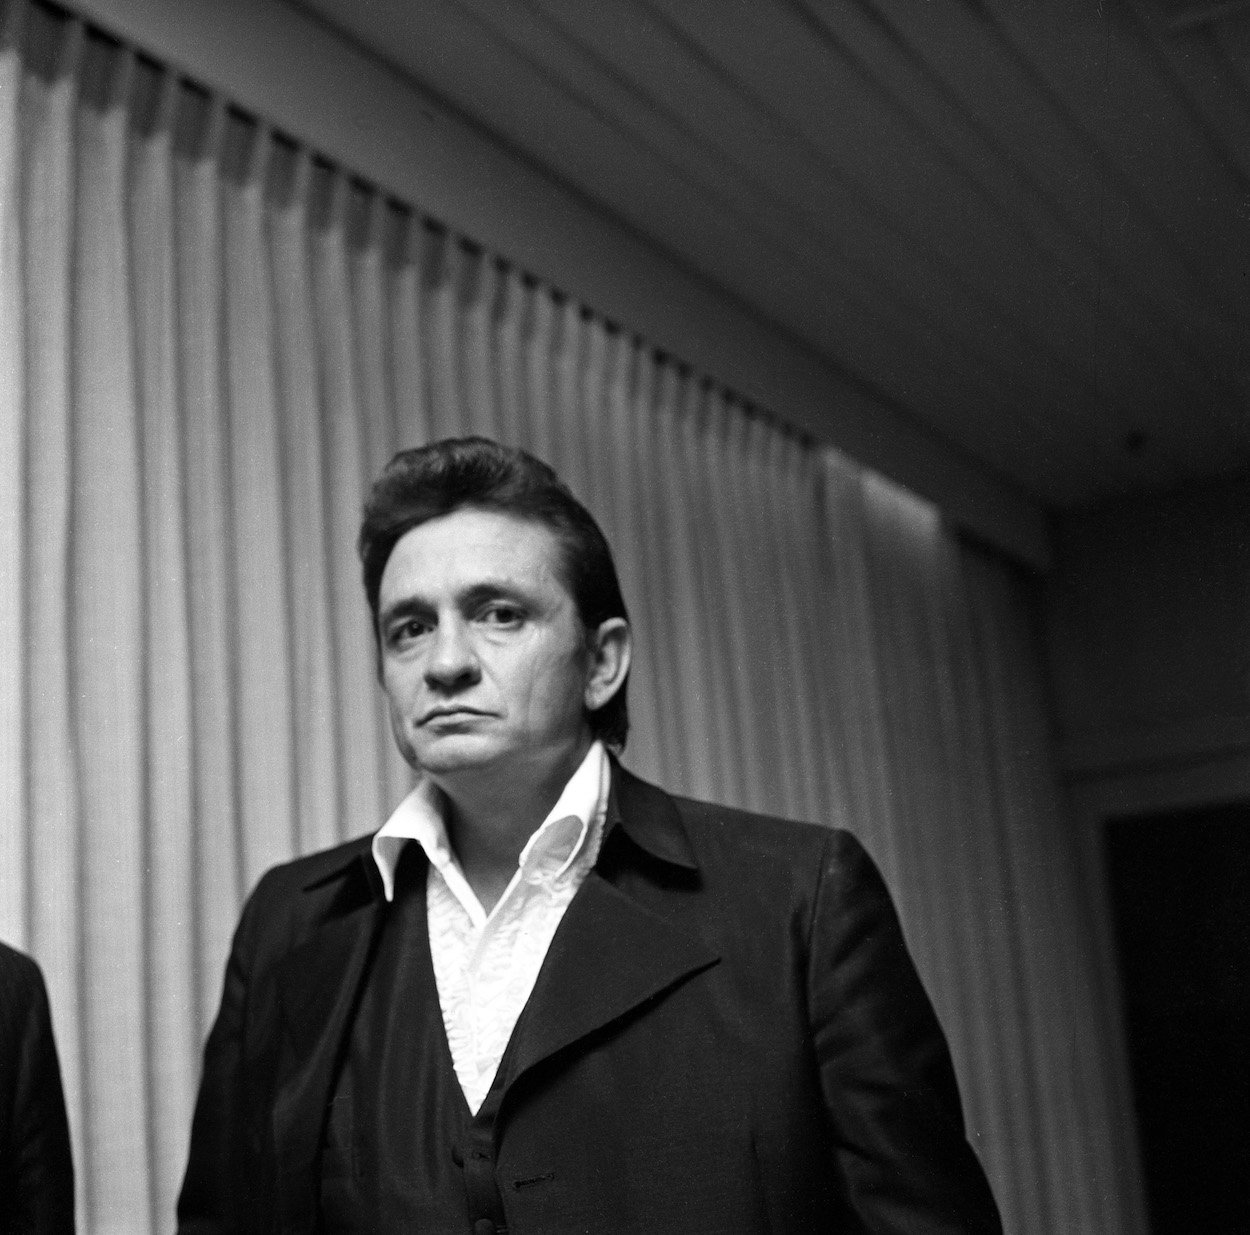 Johnny Cash backstage at an event in Los Angeles in December 1970.